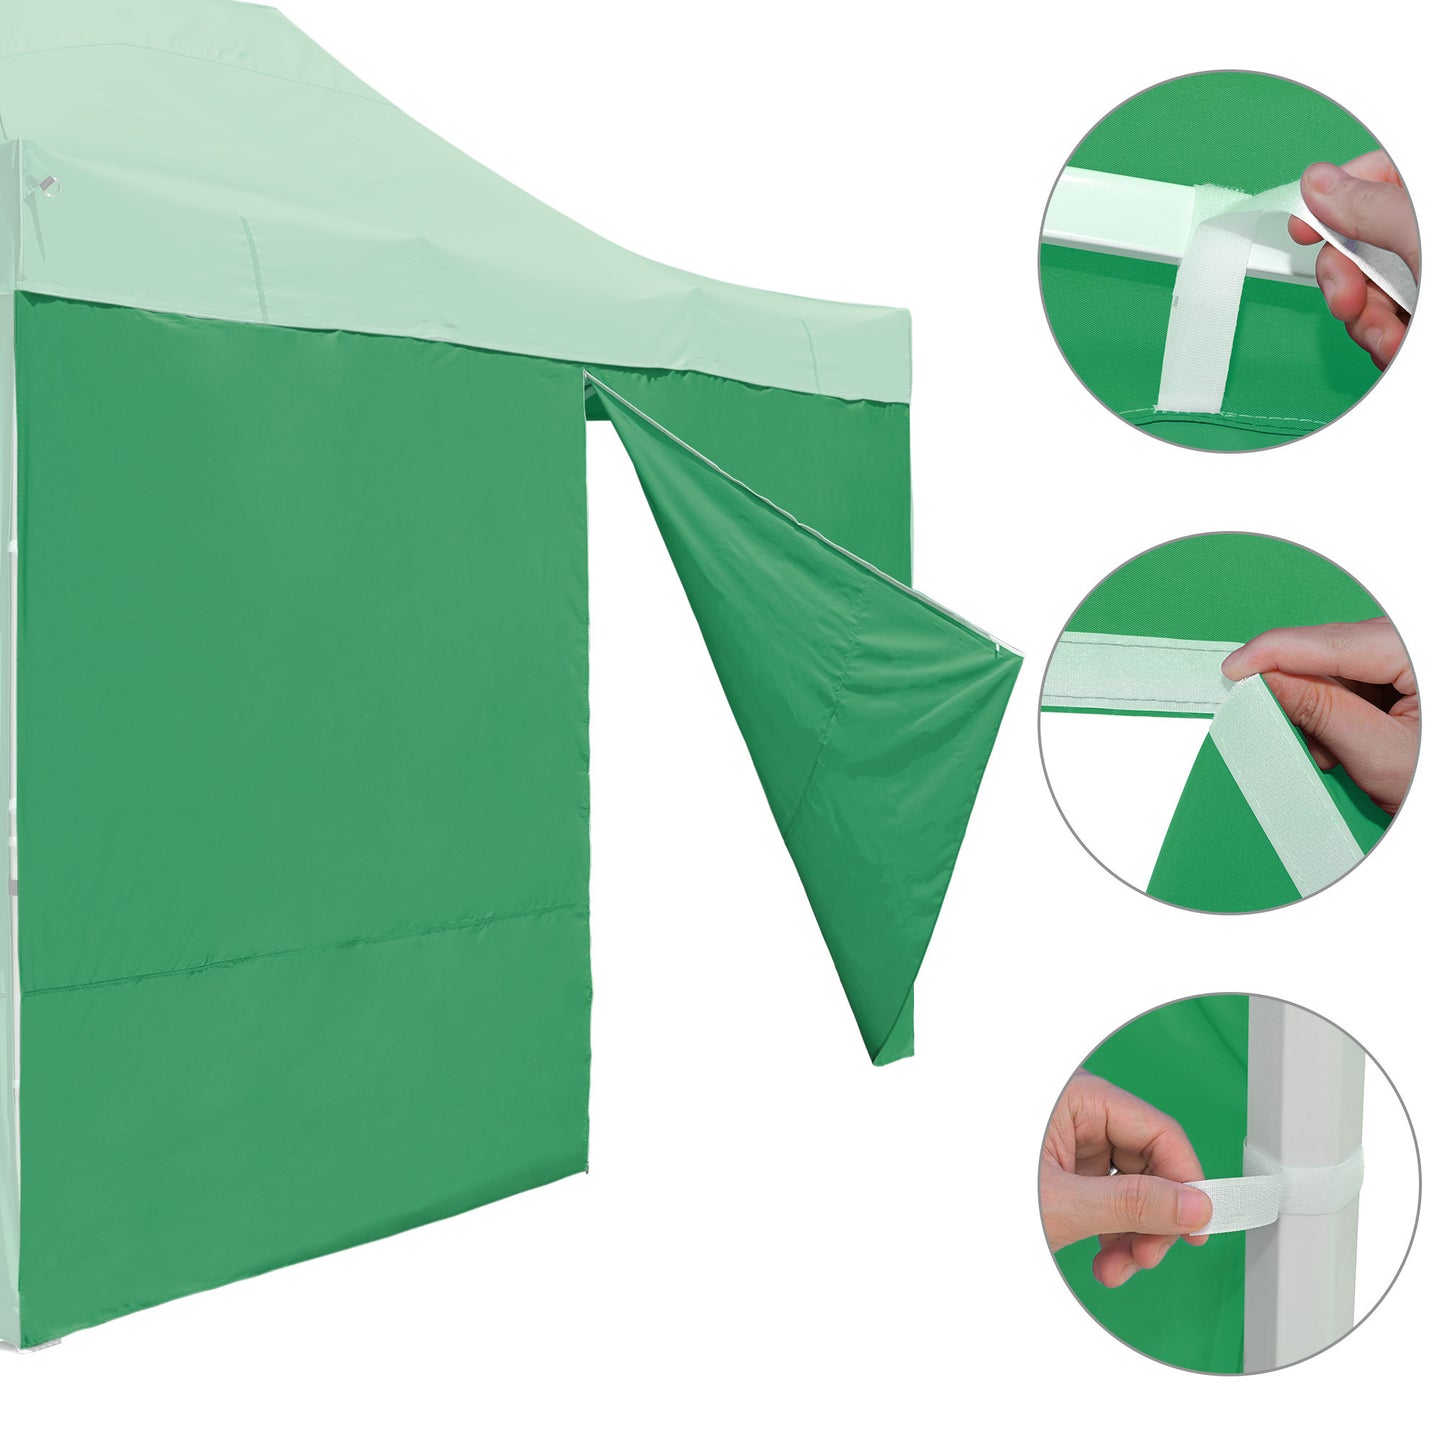 10x15ft Canopy CPAI-84 Sidewall with Zipper